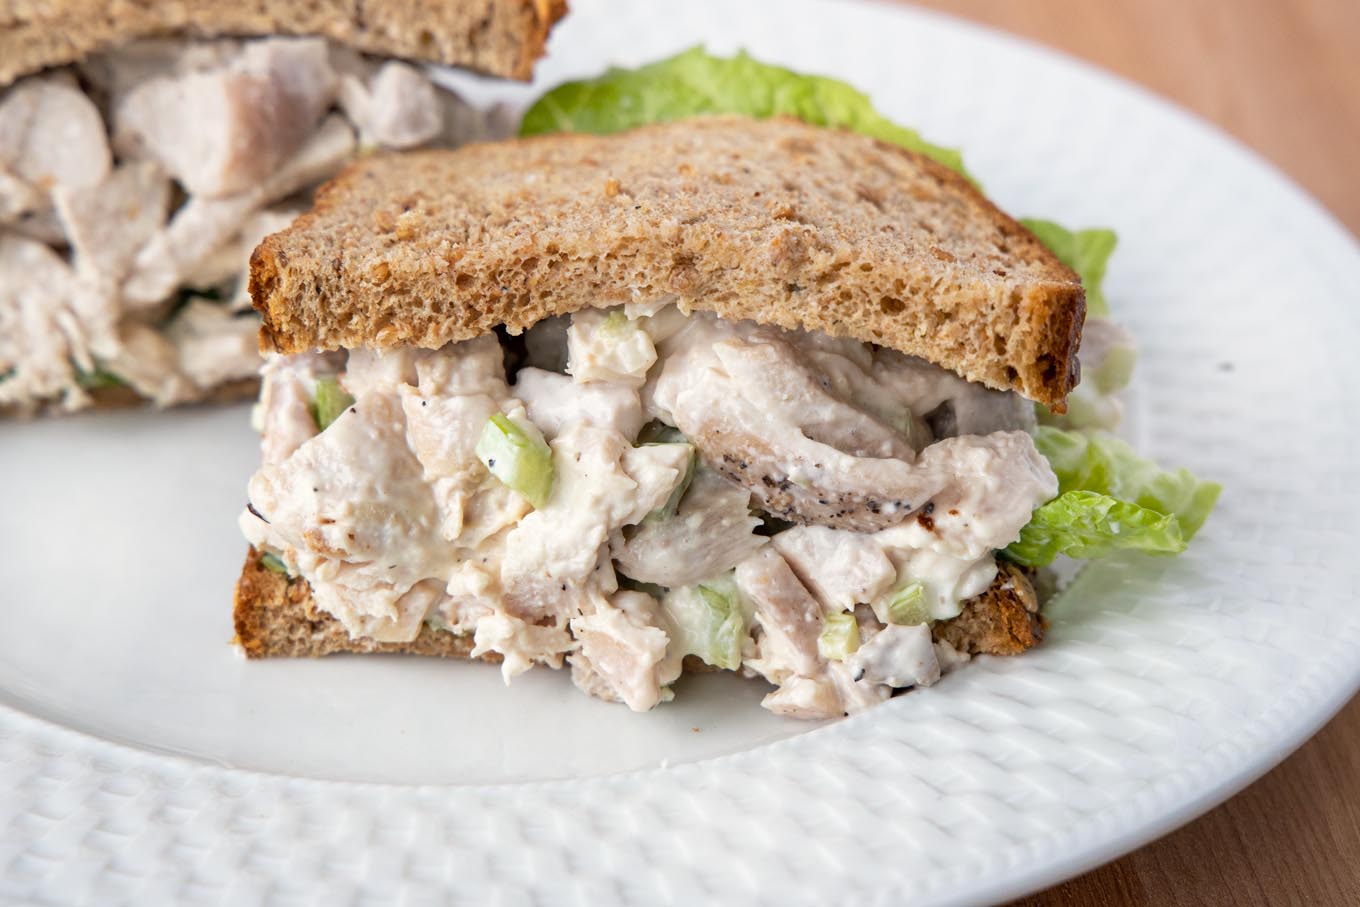 half of a chicken salad sandwich with lettuce on grain bread on a white plate with the other half behind it